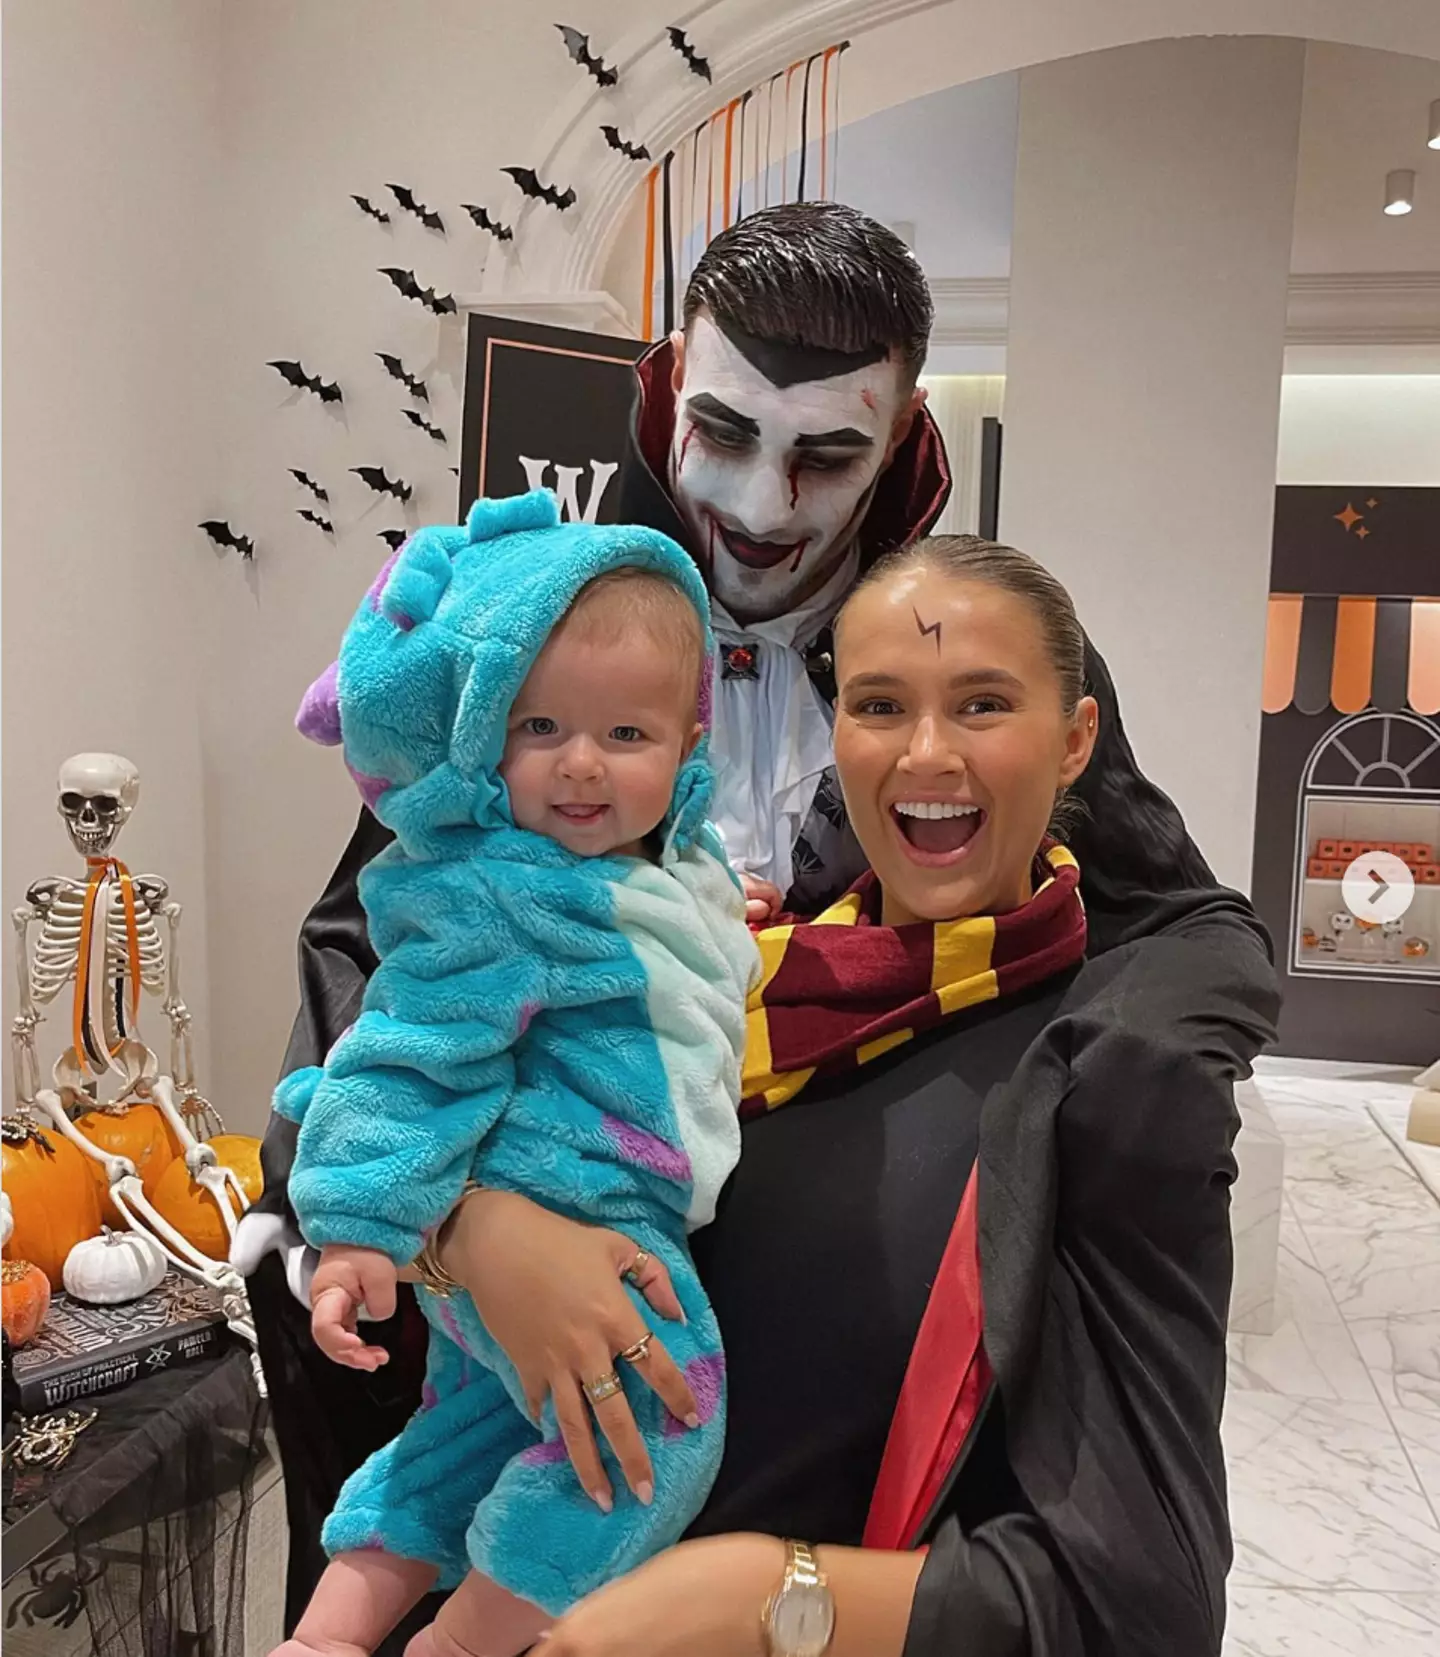 The whole family dressed up for Halloween.